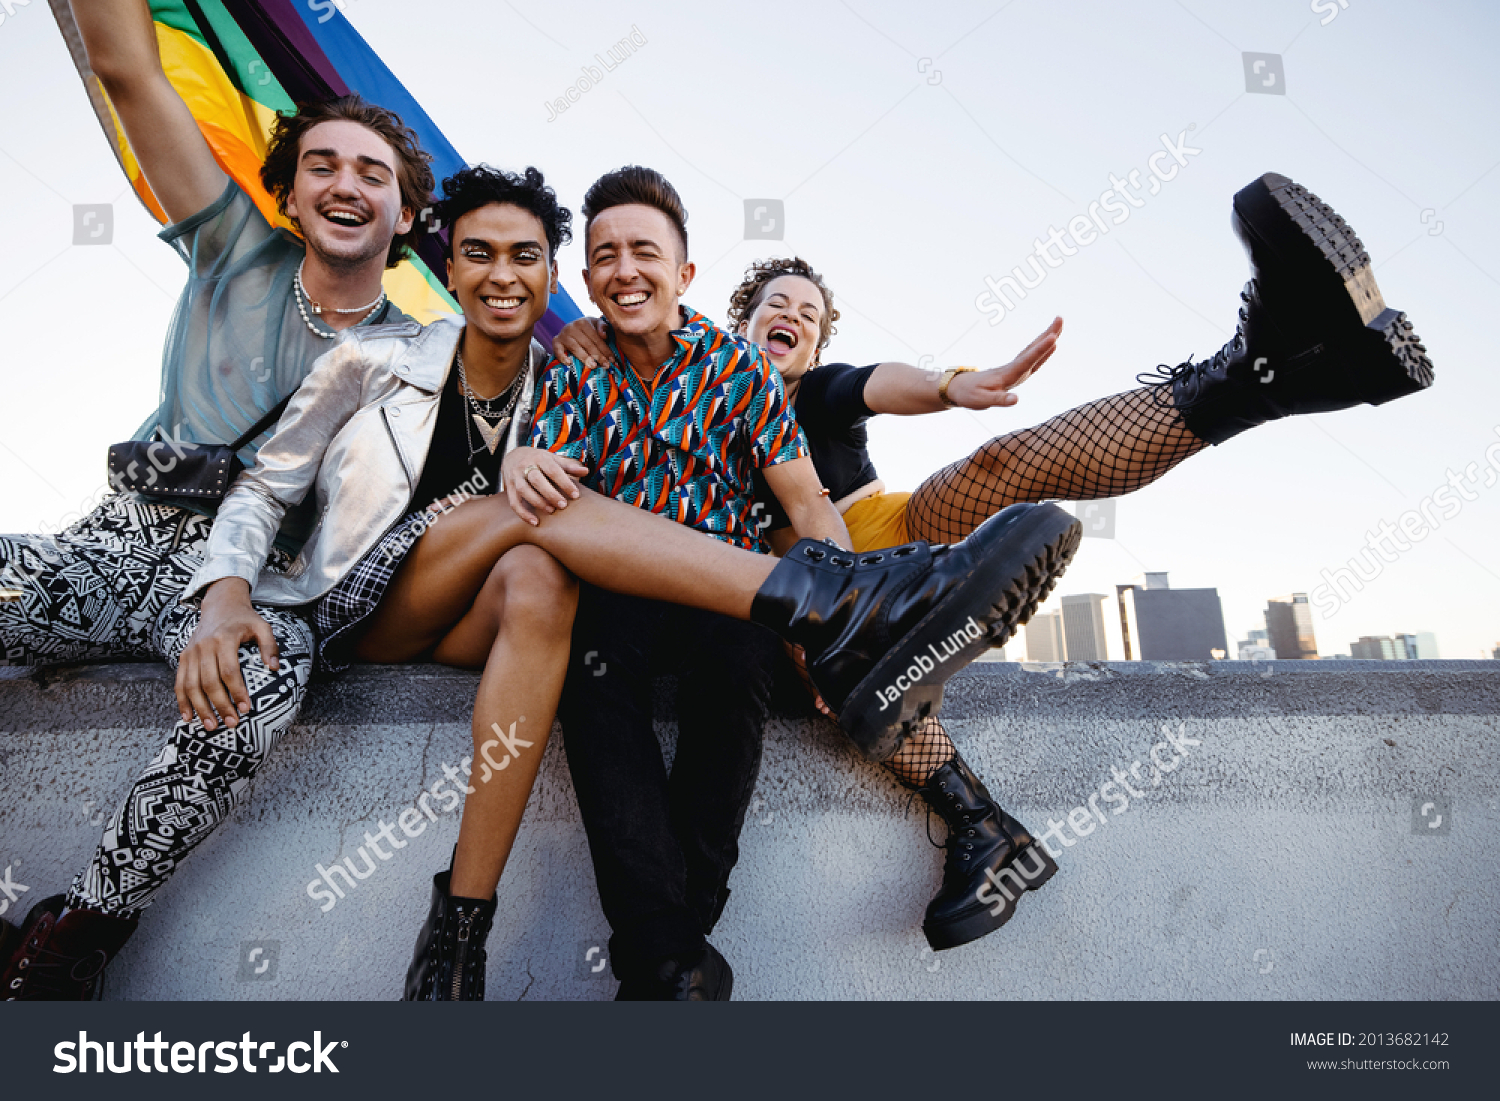 Four LGBTQ people celebrating pride while sitting together. Four friends smiling cheerfully while raising the rainbow pride flag. Group of young queer individuals celebrating together outdoors. #2013682142